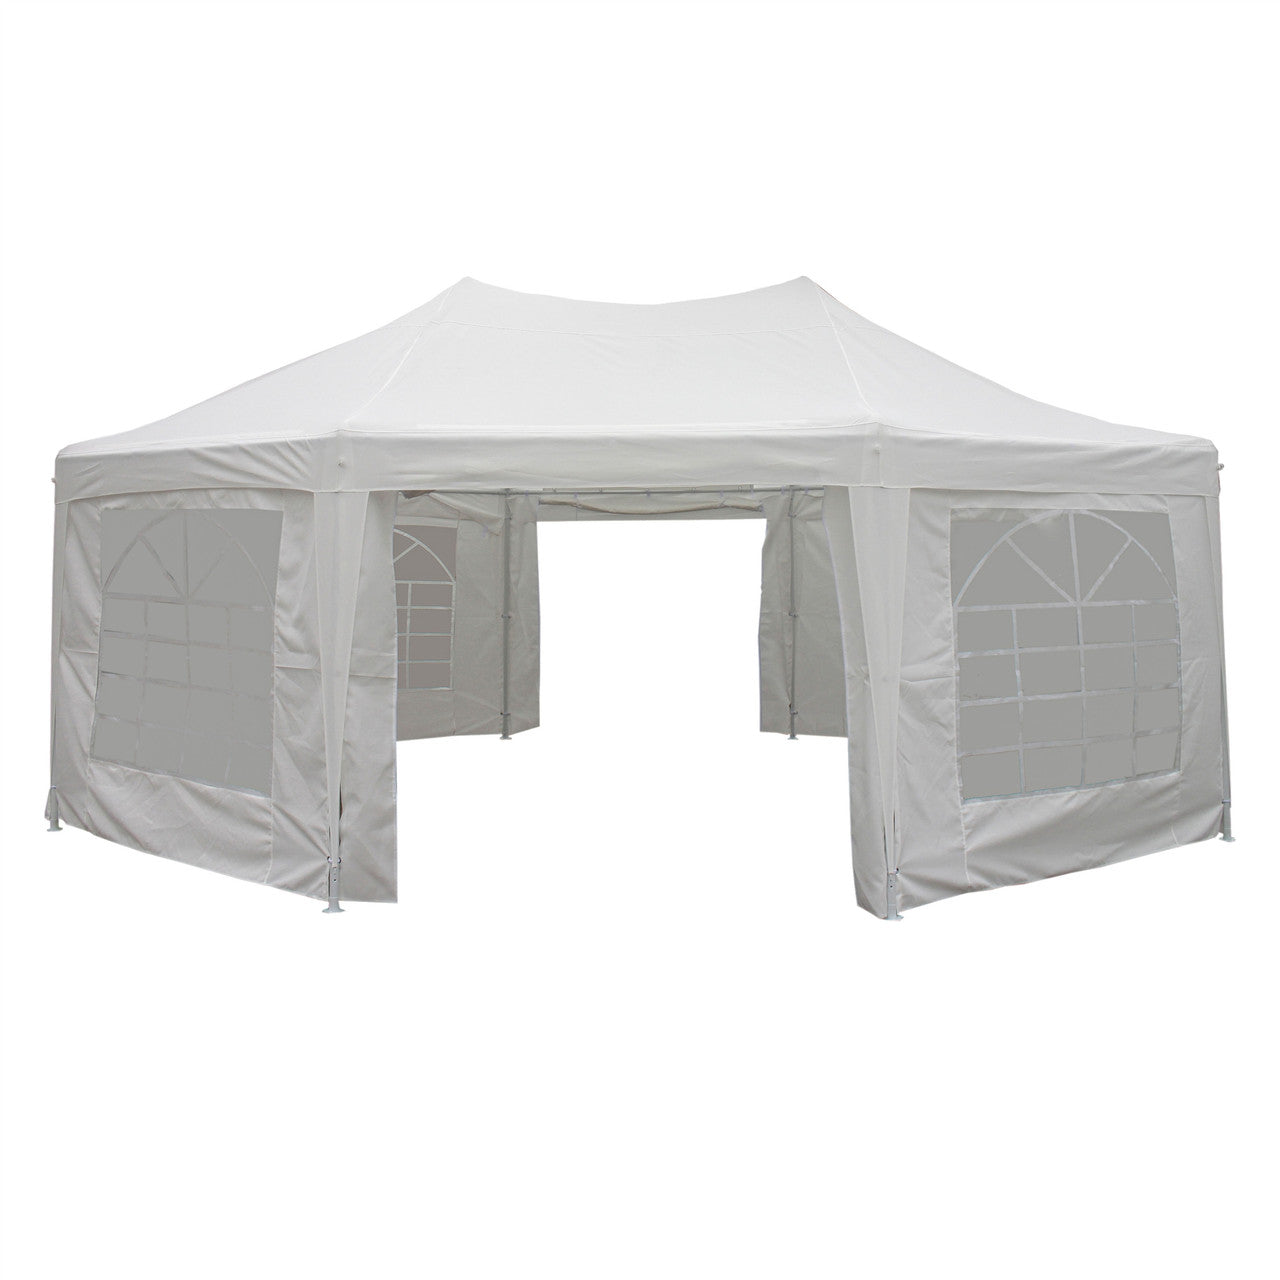 Aleko Heavy Duty Octagonal Outdoor Canopy Event Tent with Windows - 20 X 14 FT - White PWT22X16-AP - Serenity Provision